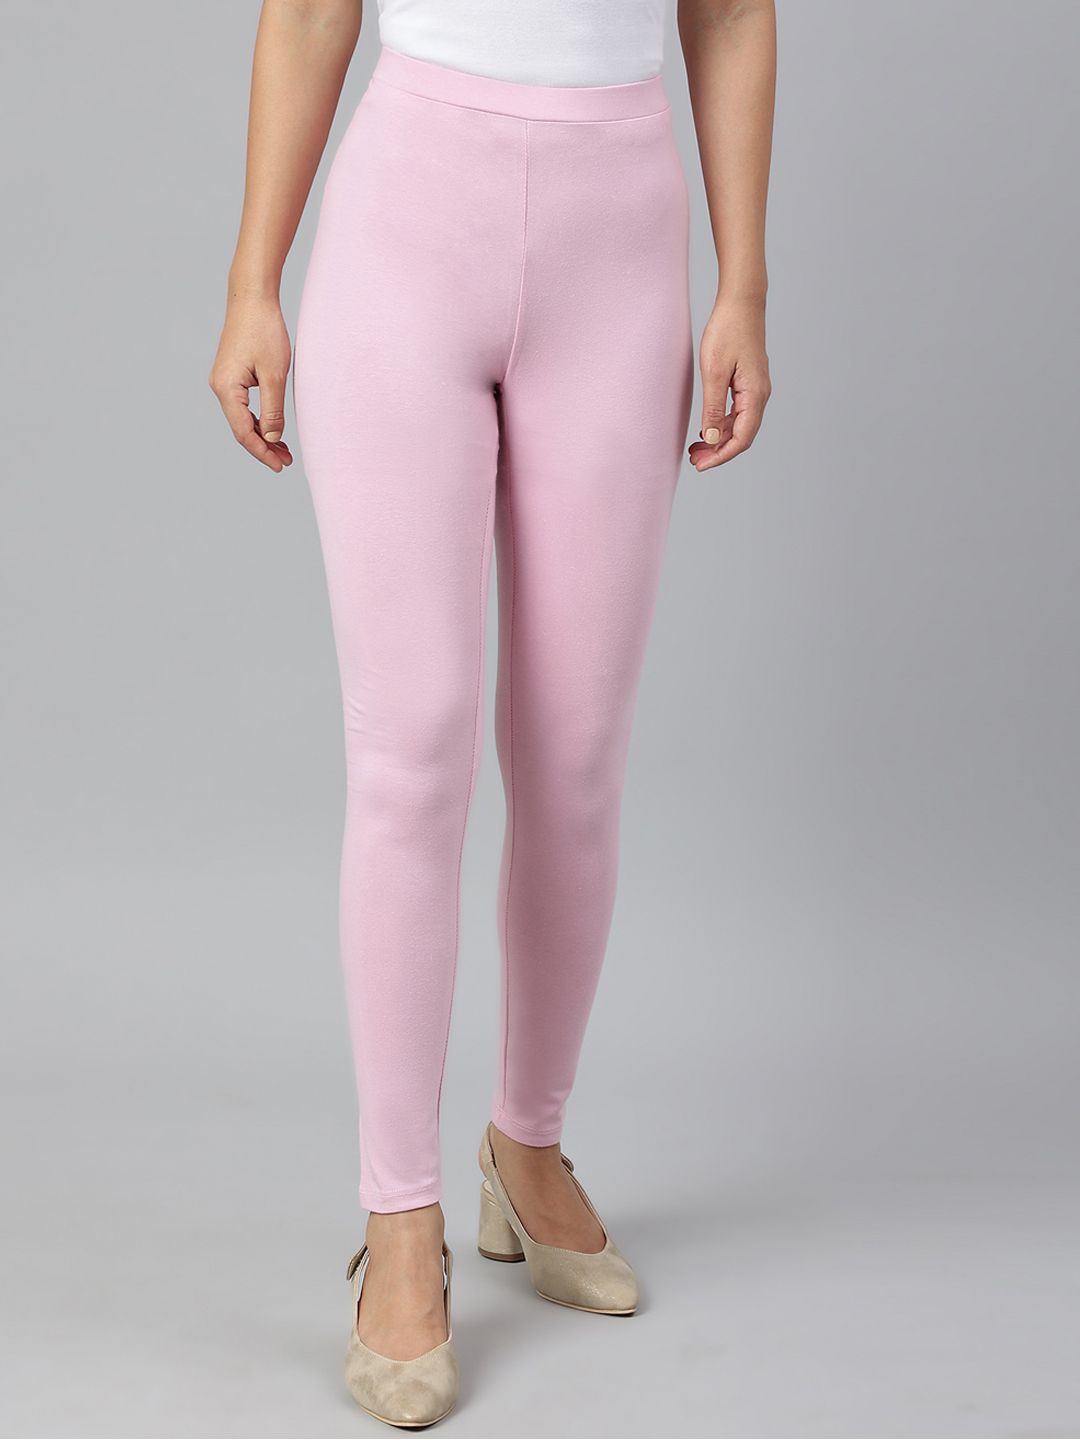 W Women Pink Solid Ankle-Length Leggings Price in India